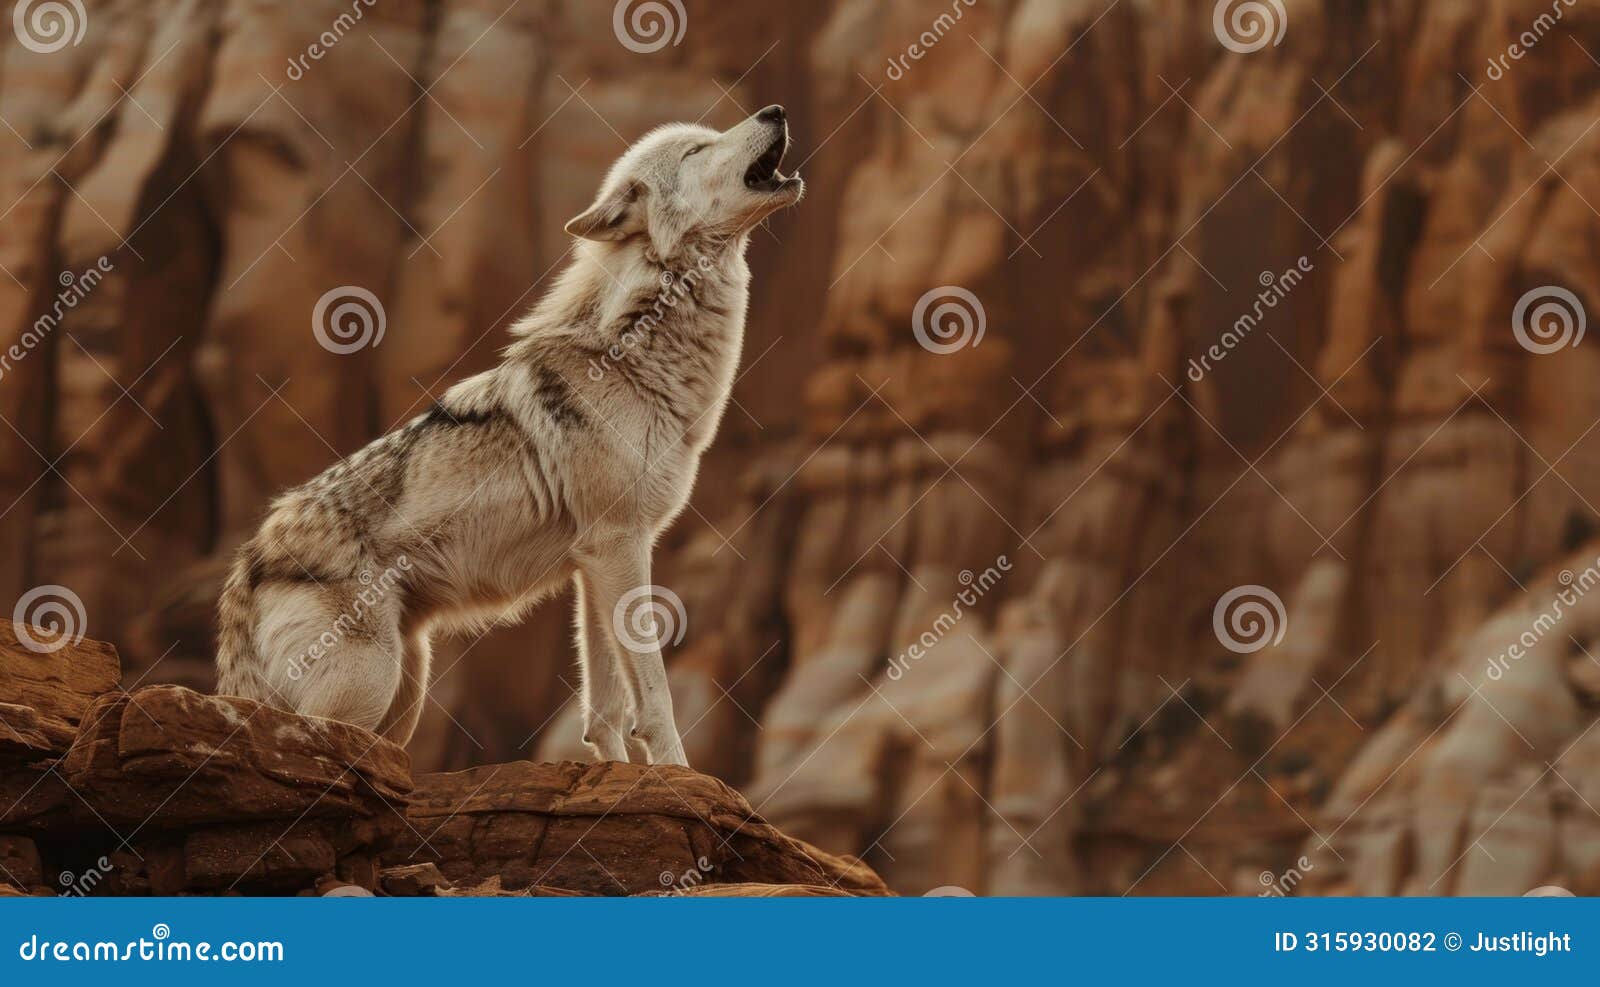 a lone wolf howling at the moon its mournful cries echoing through the canyon.